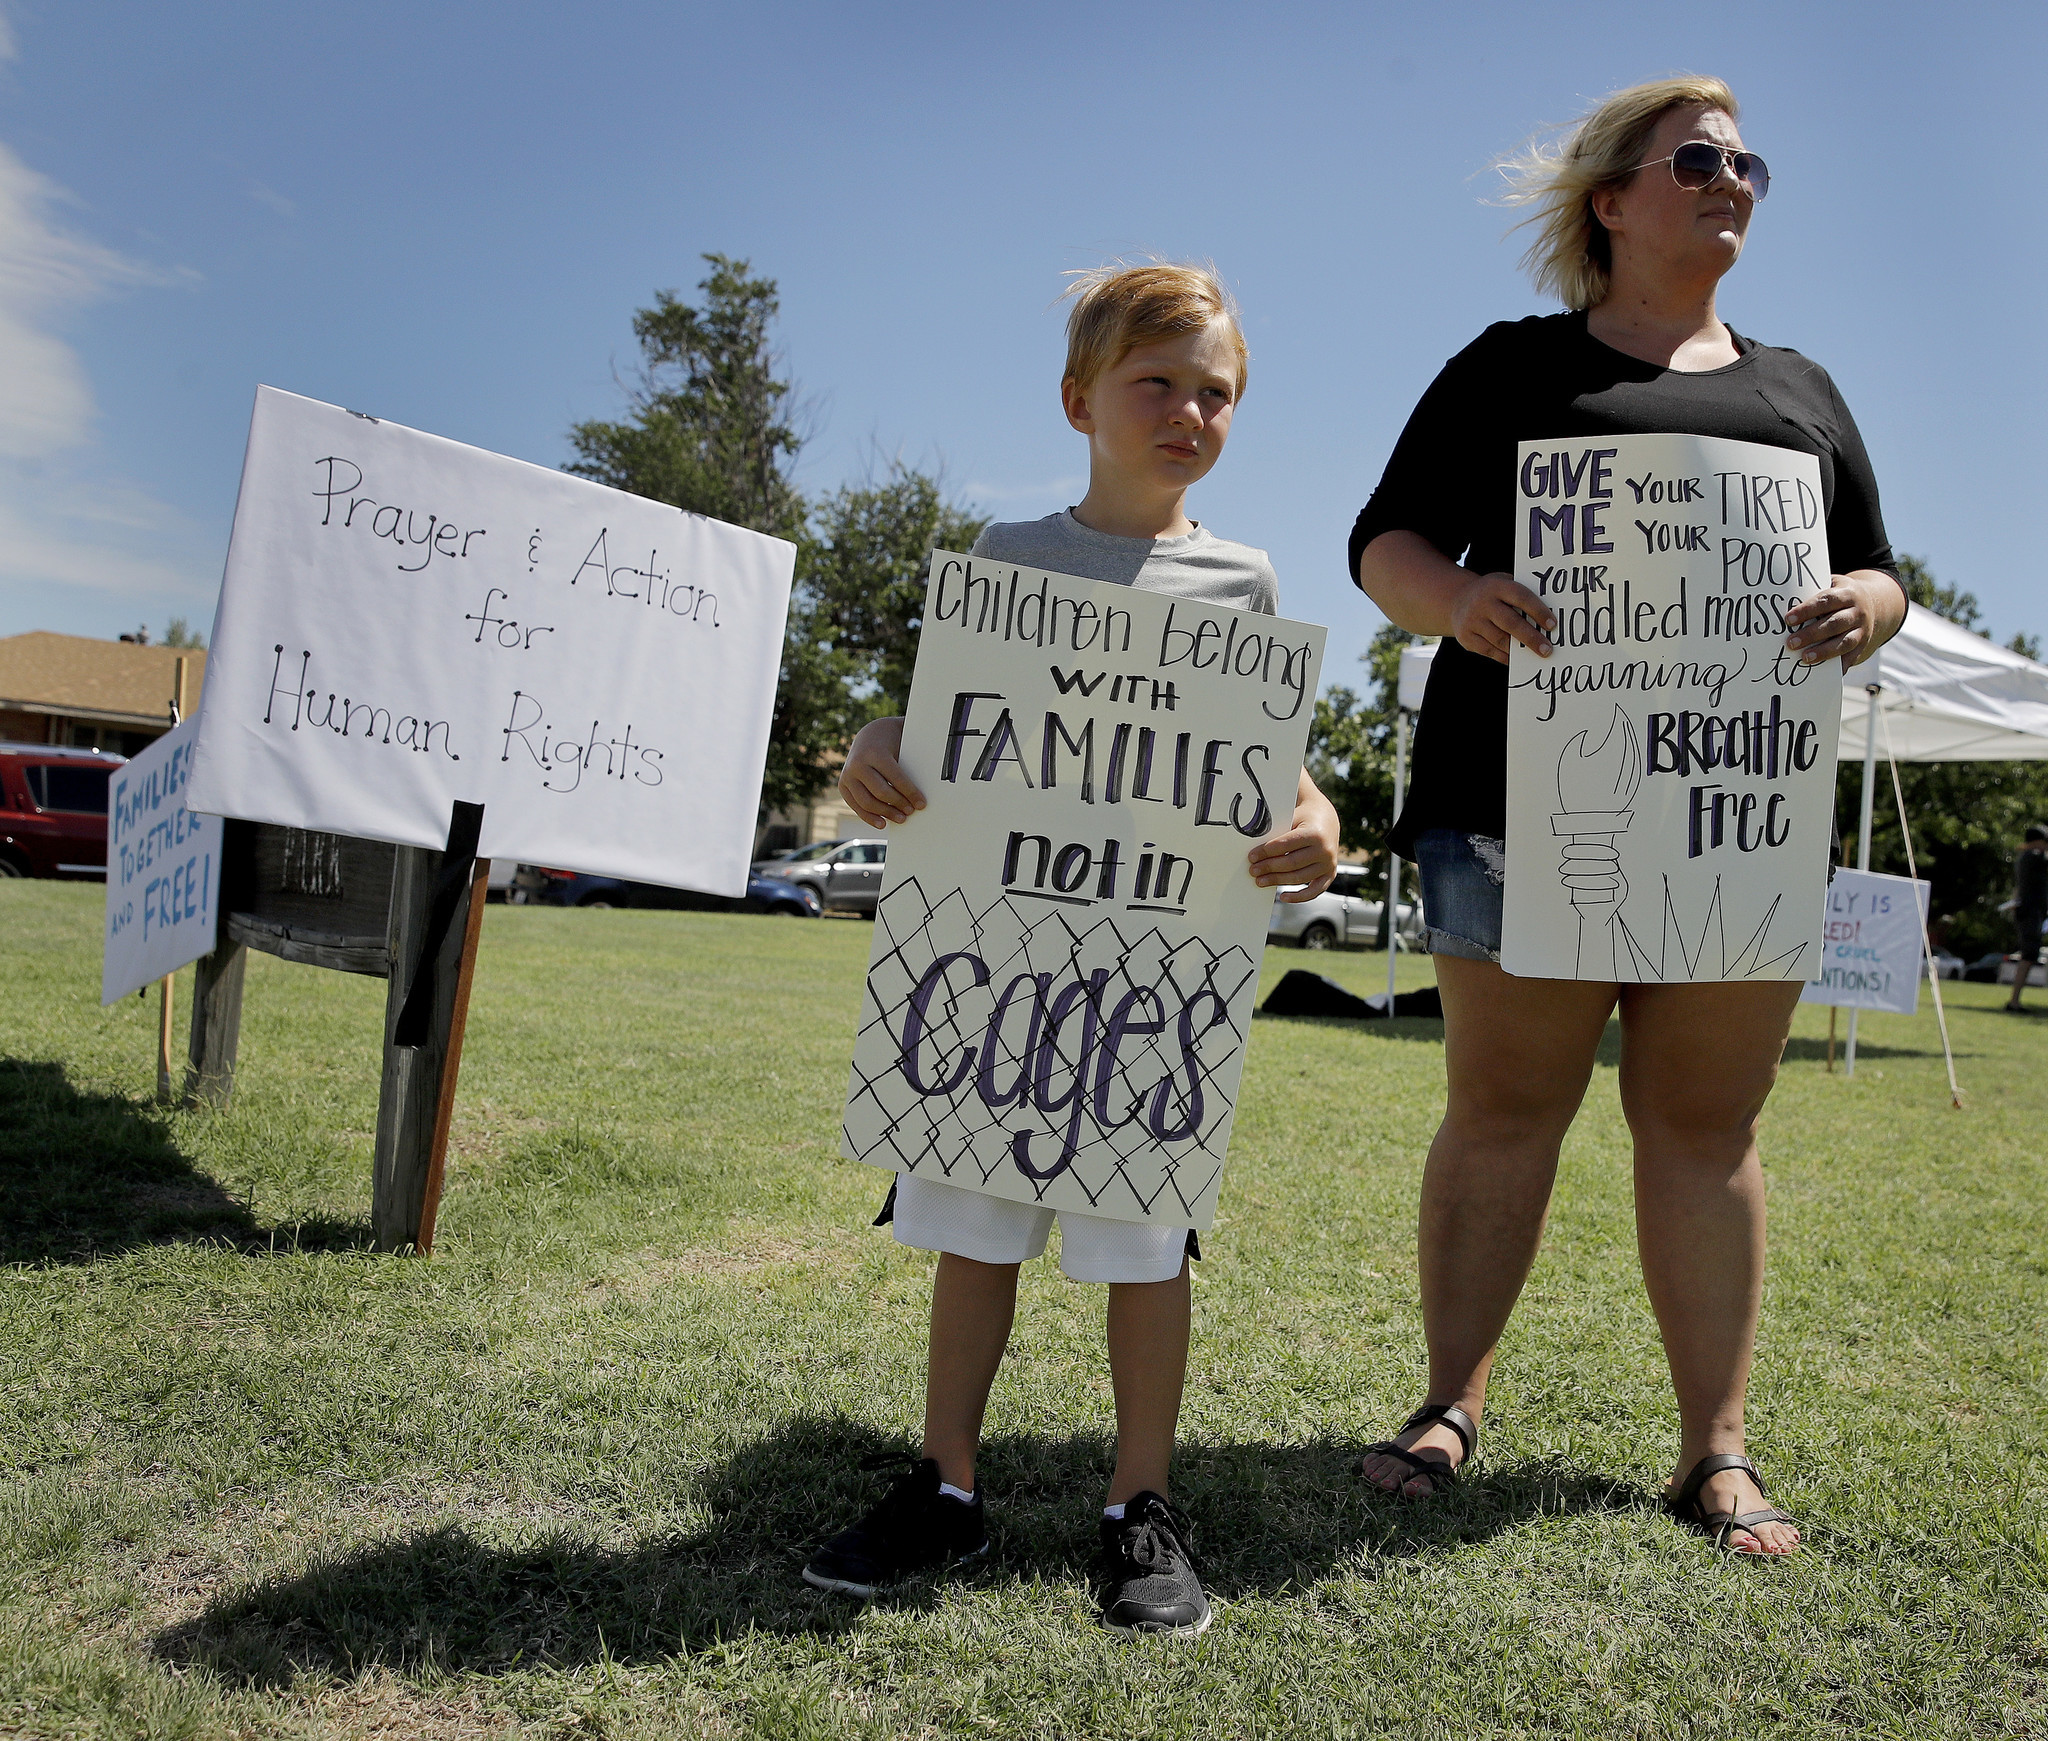 DODGE CITY, KAN.: Bennett Heeke, 5, and his mother, Sarah Doll Heeke, hold signs at a rally protesting U.S. immigration policies. Charlie Riedel / Associated Press